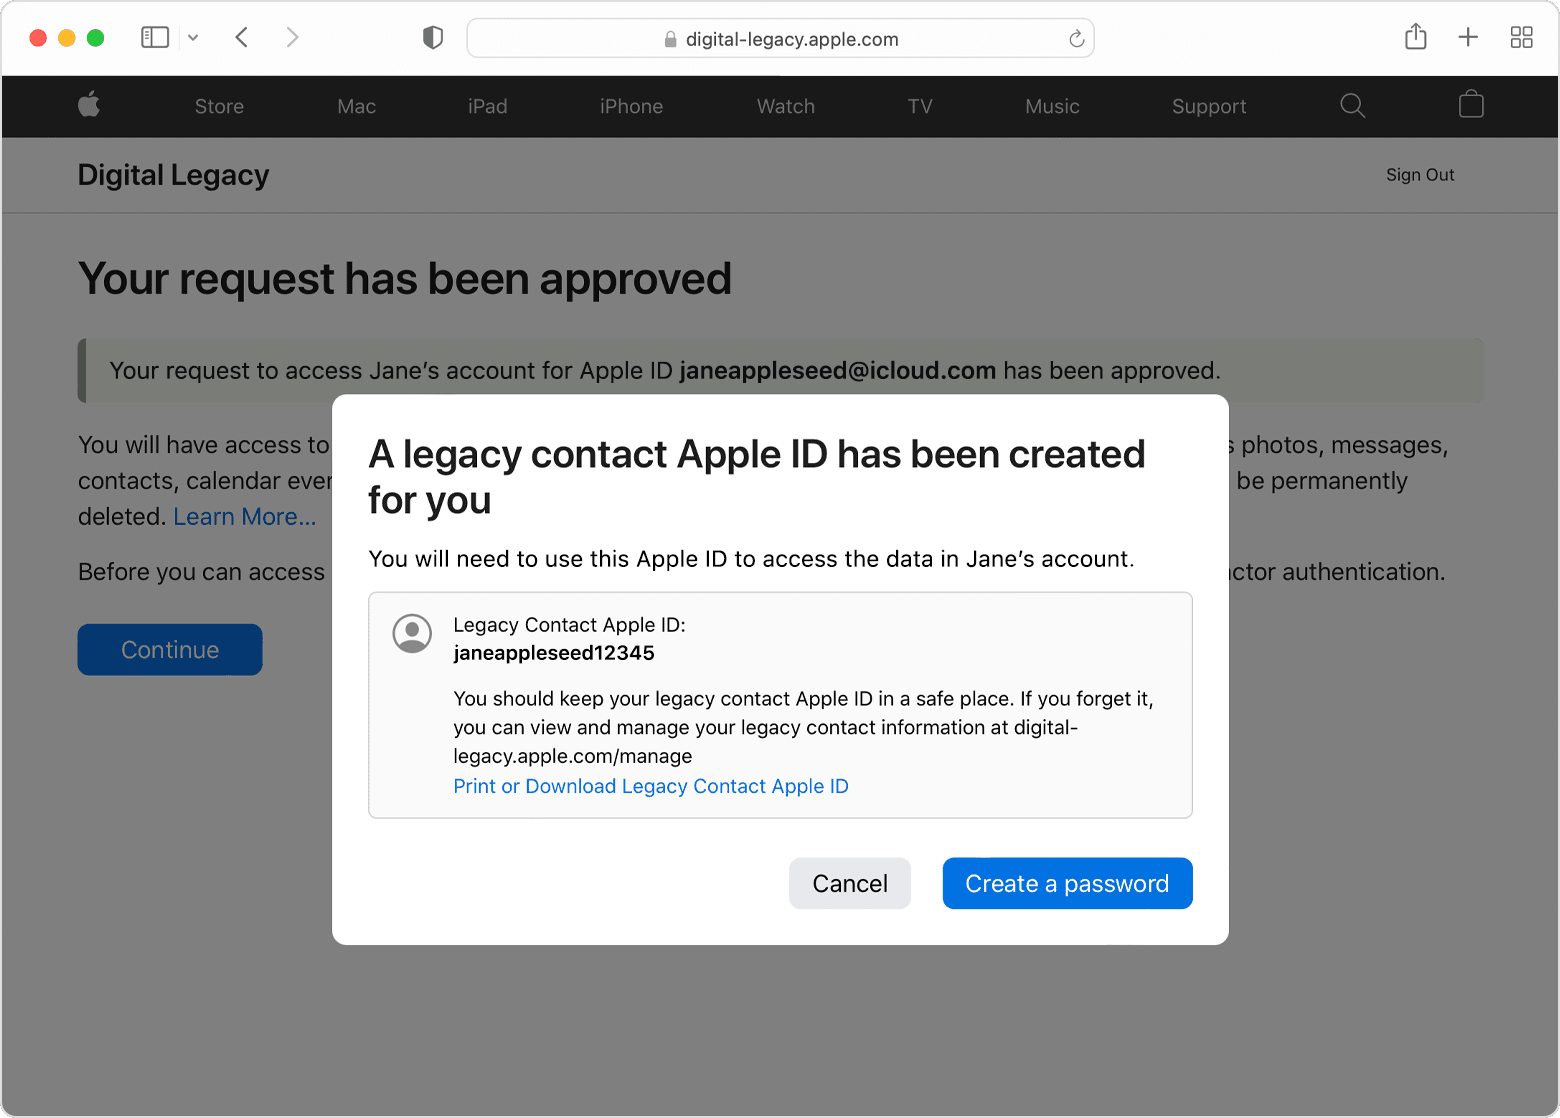 After your Legacy Contact request has been approved, you’ll receive a message letting you know that a Legacy Contact Apple ID has been created for you. You can print or download this Legacy Contact Apple ID, or tap the blue Create a password button.